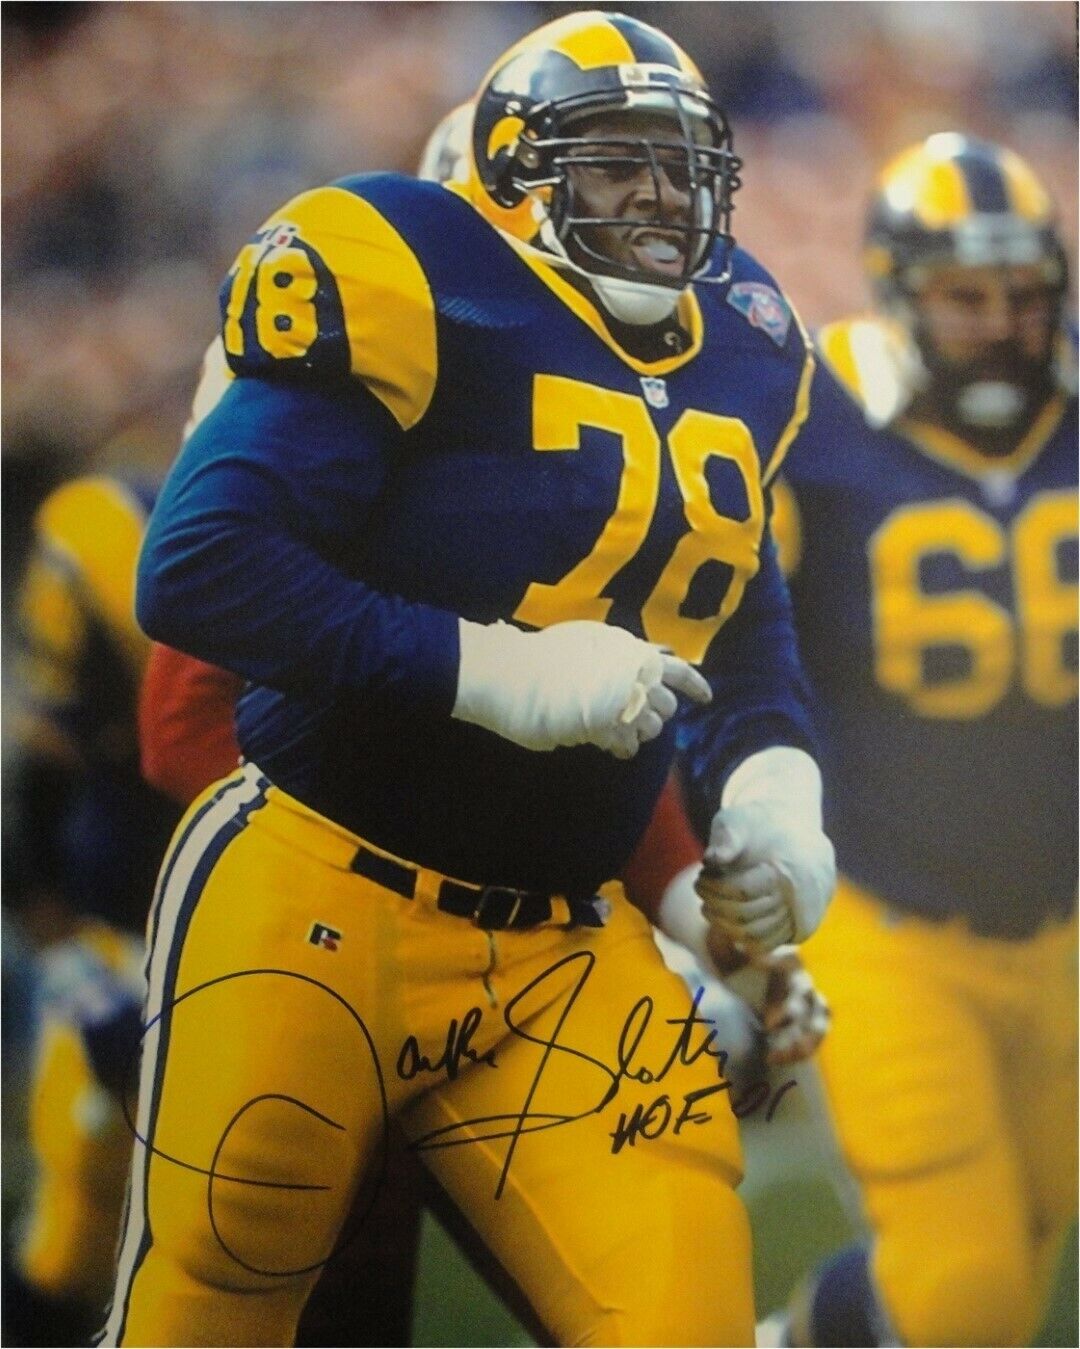 Jackie Slater Hand Signed Autographed 16x20 Photo Poster painting Los Angeles Rams HOF 01 Blue